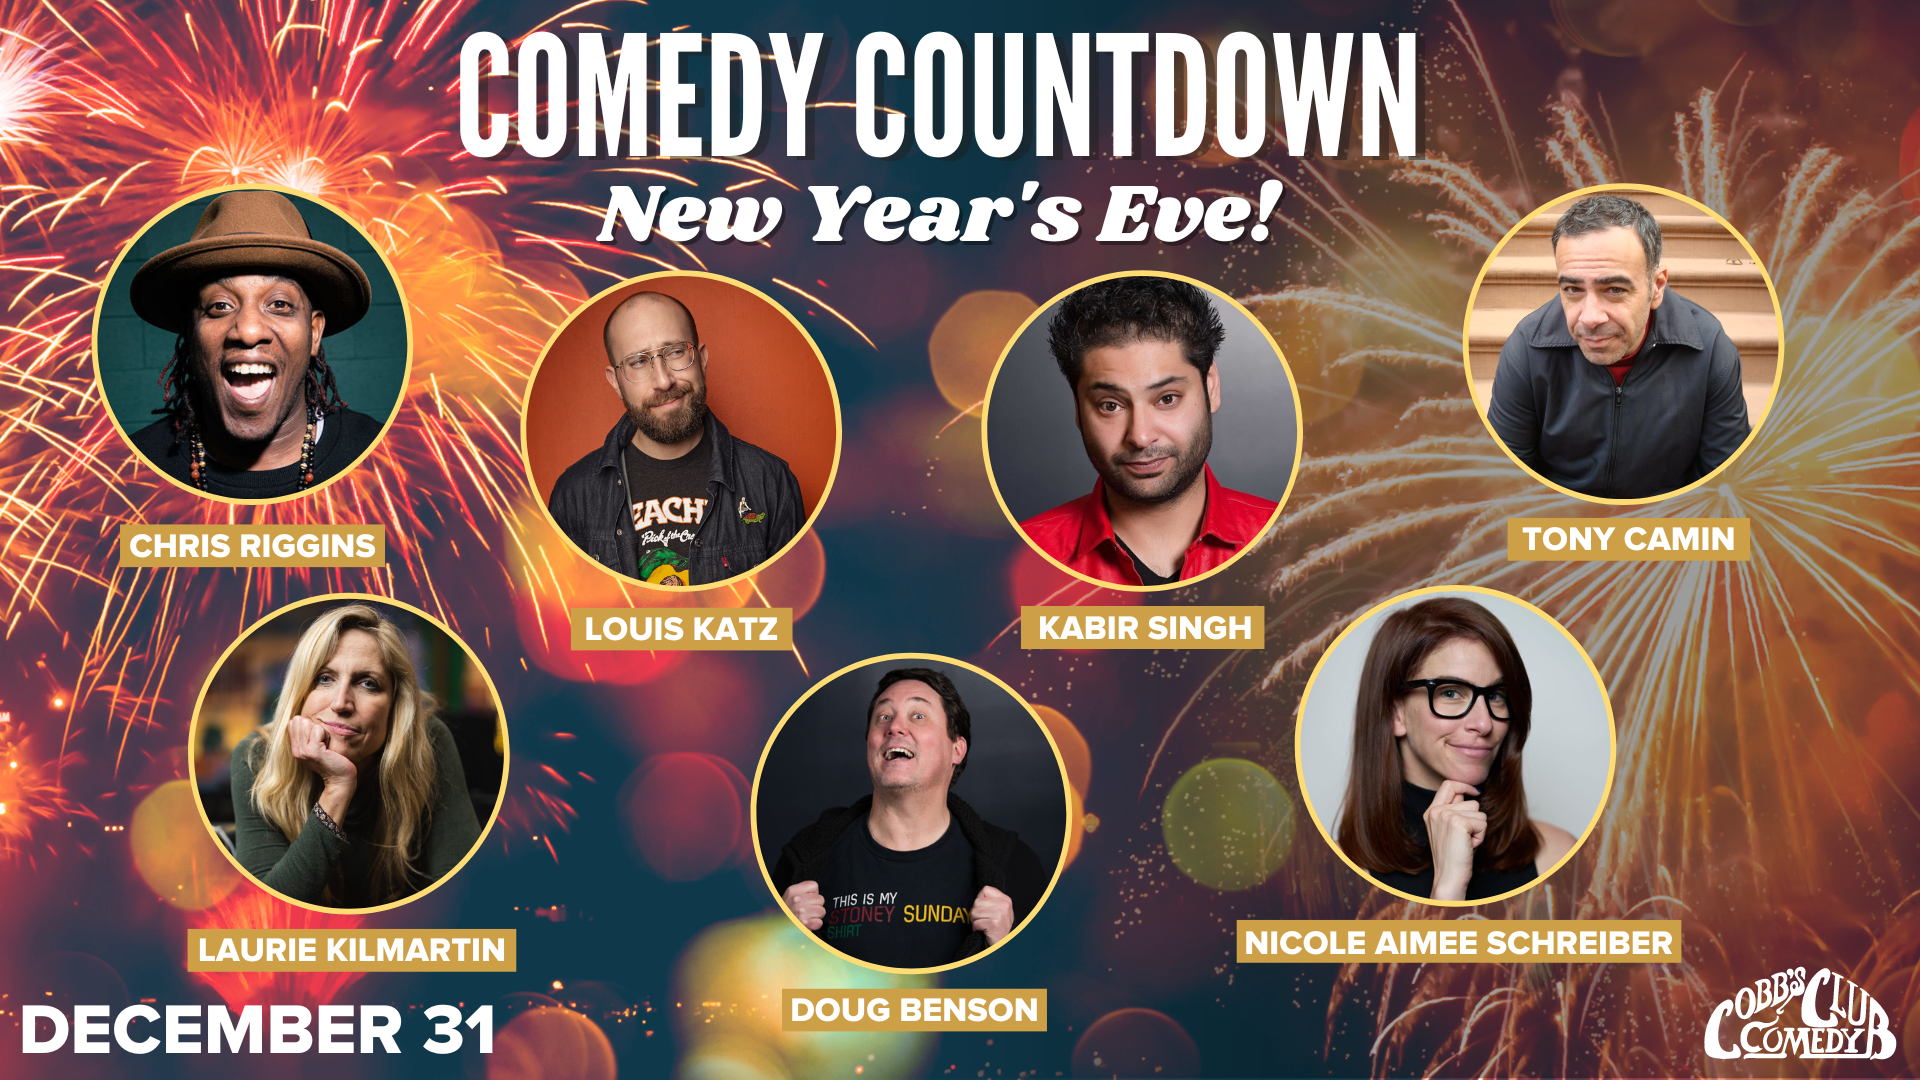 Comedy Countdown - New Year's Eve Countdown Show